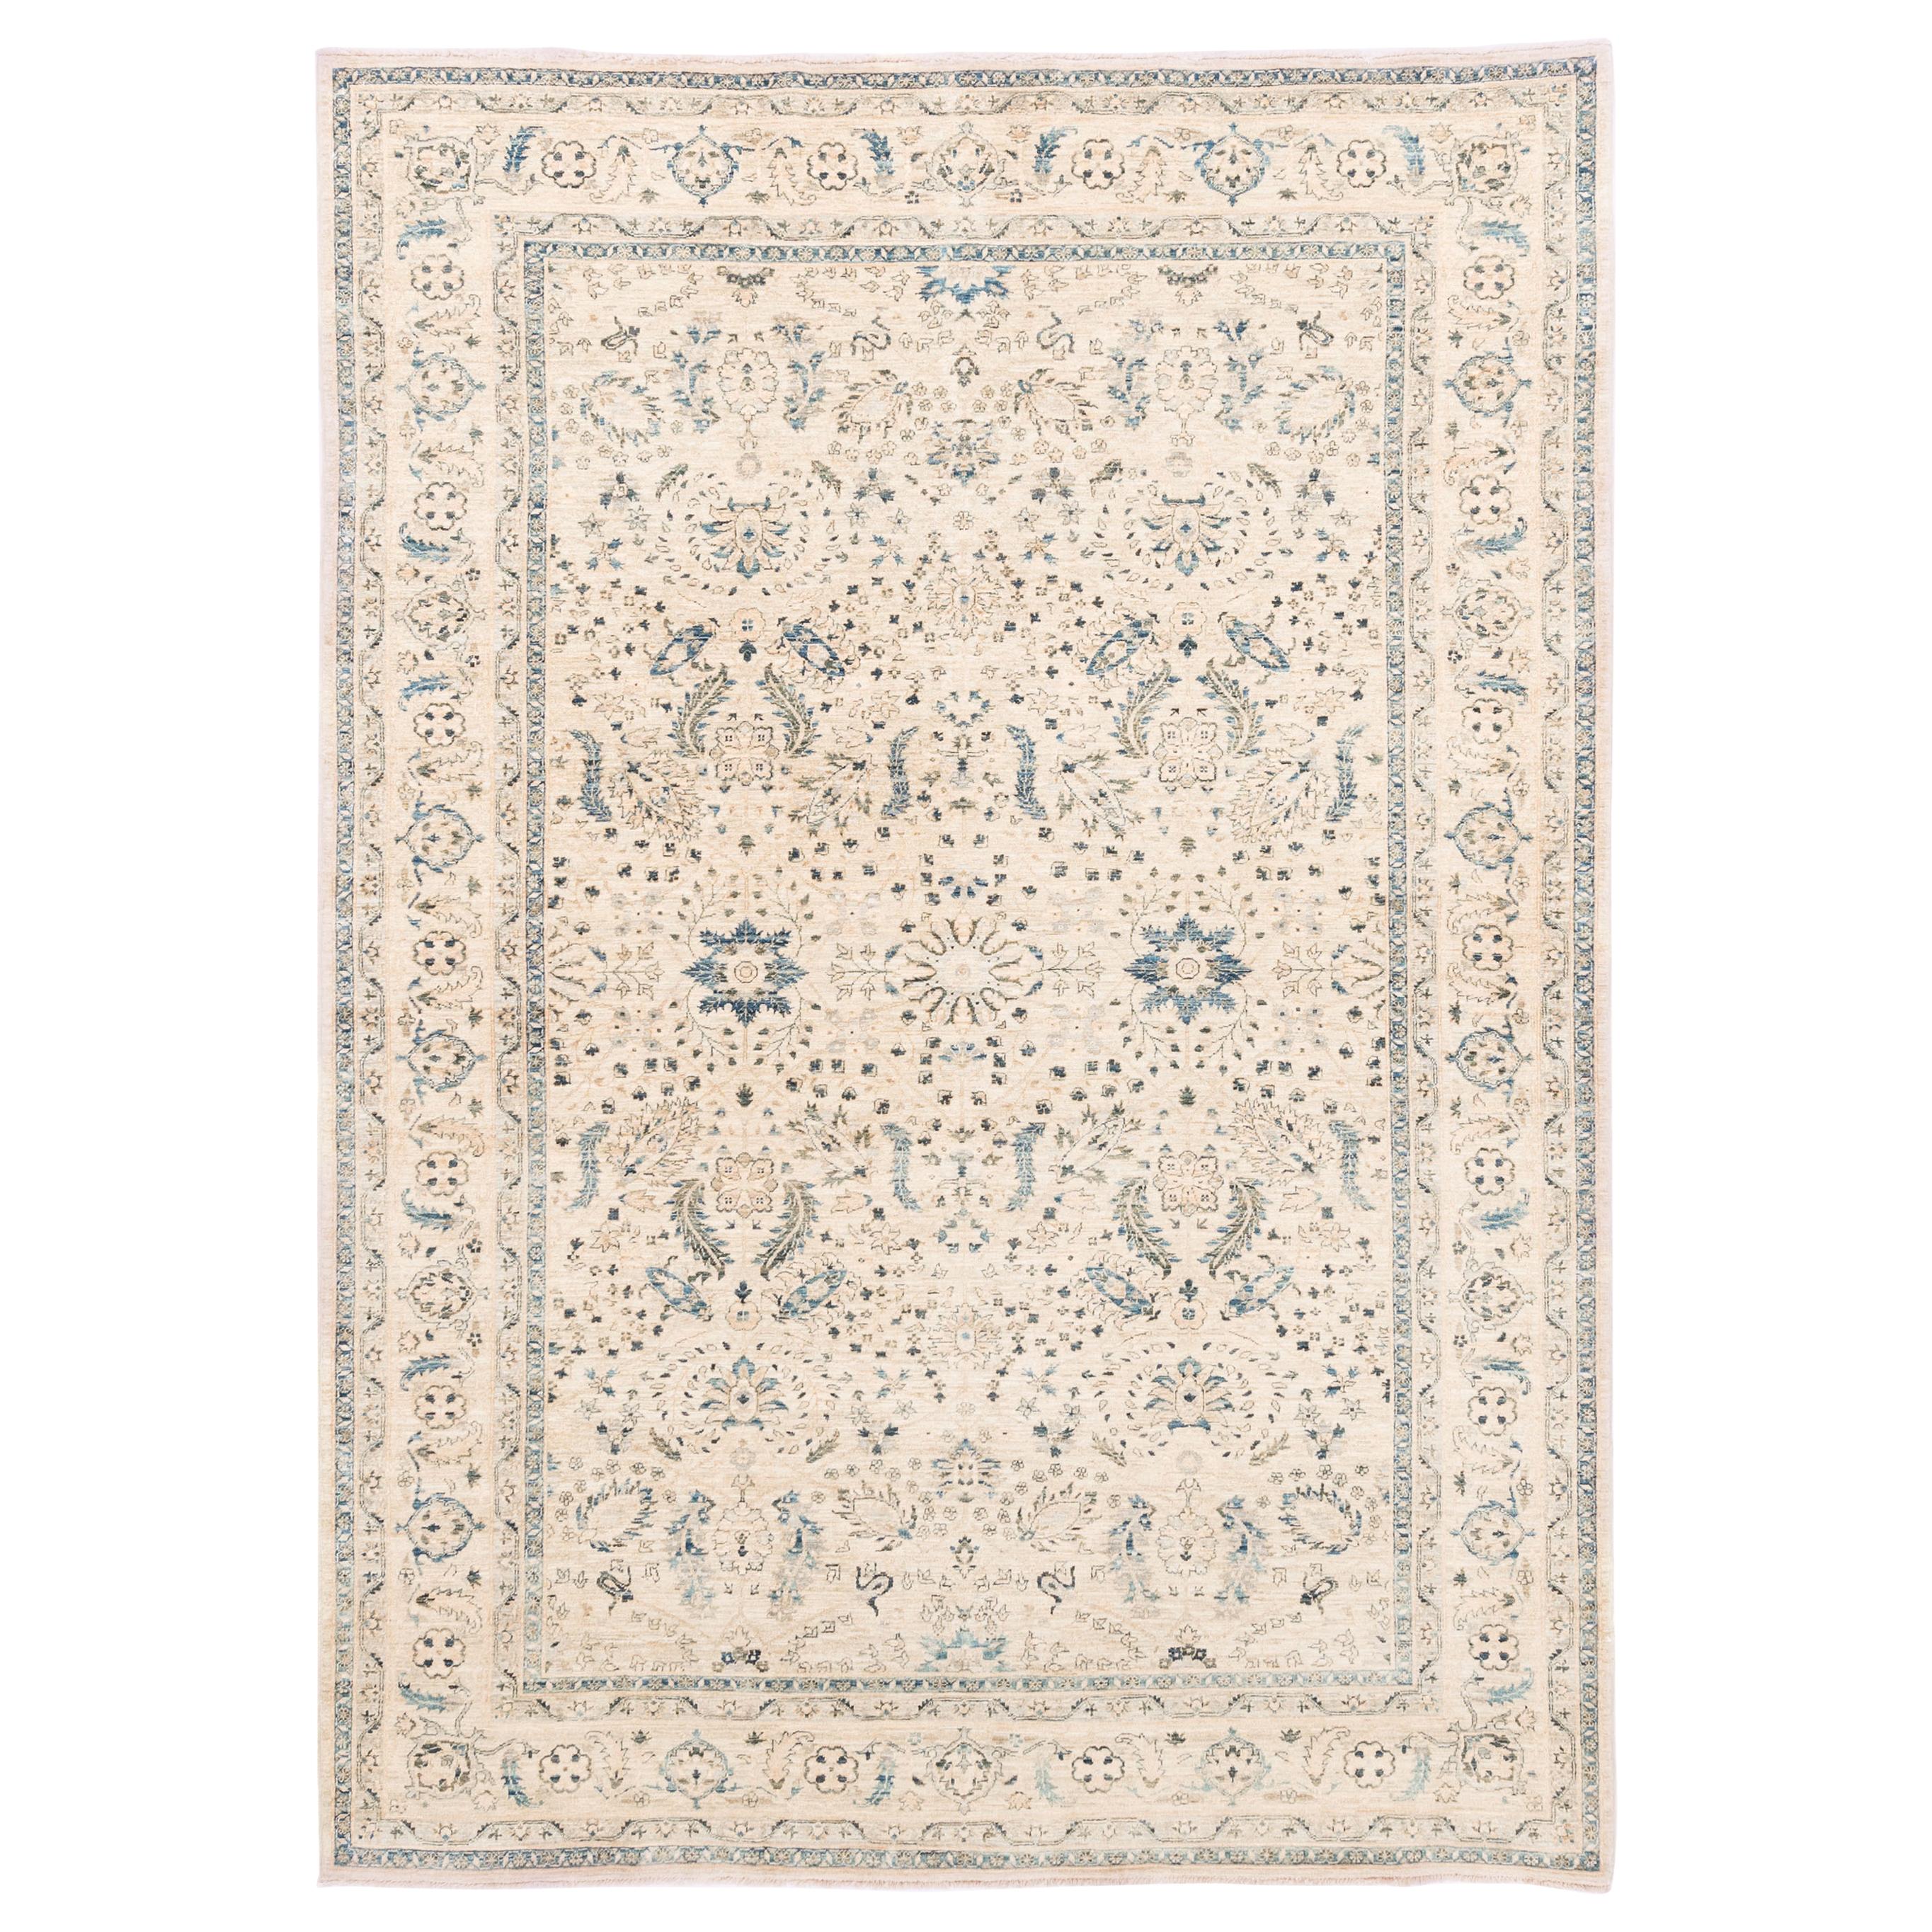 New Afghan Transitional Rug Handwoven with Ivory and Blue Wool